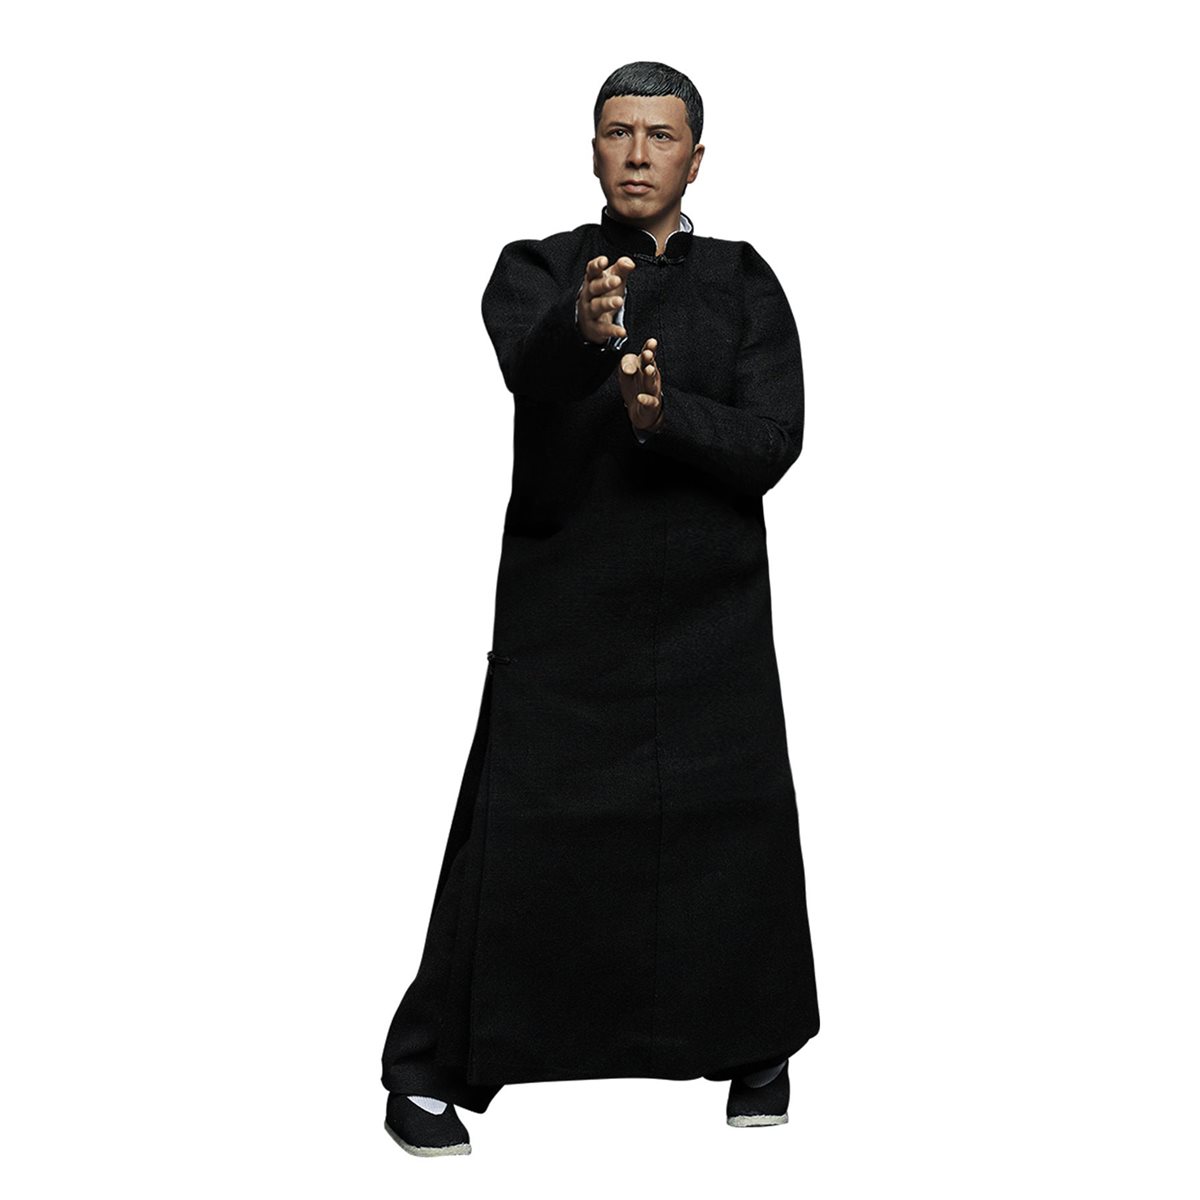 Ip Man 4 The Finale 1:6 Scale Real 